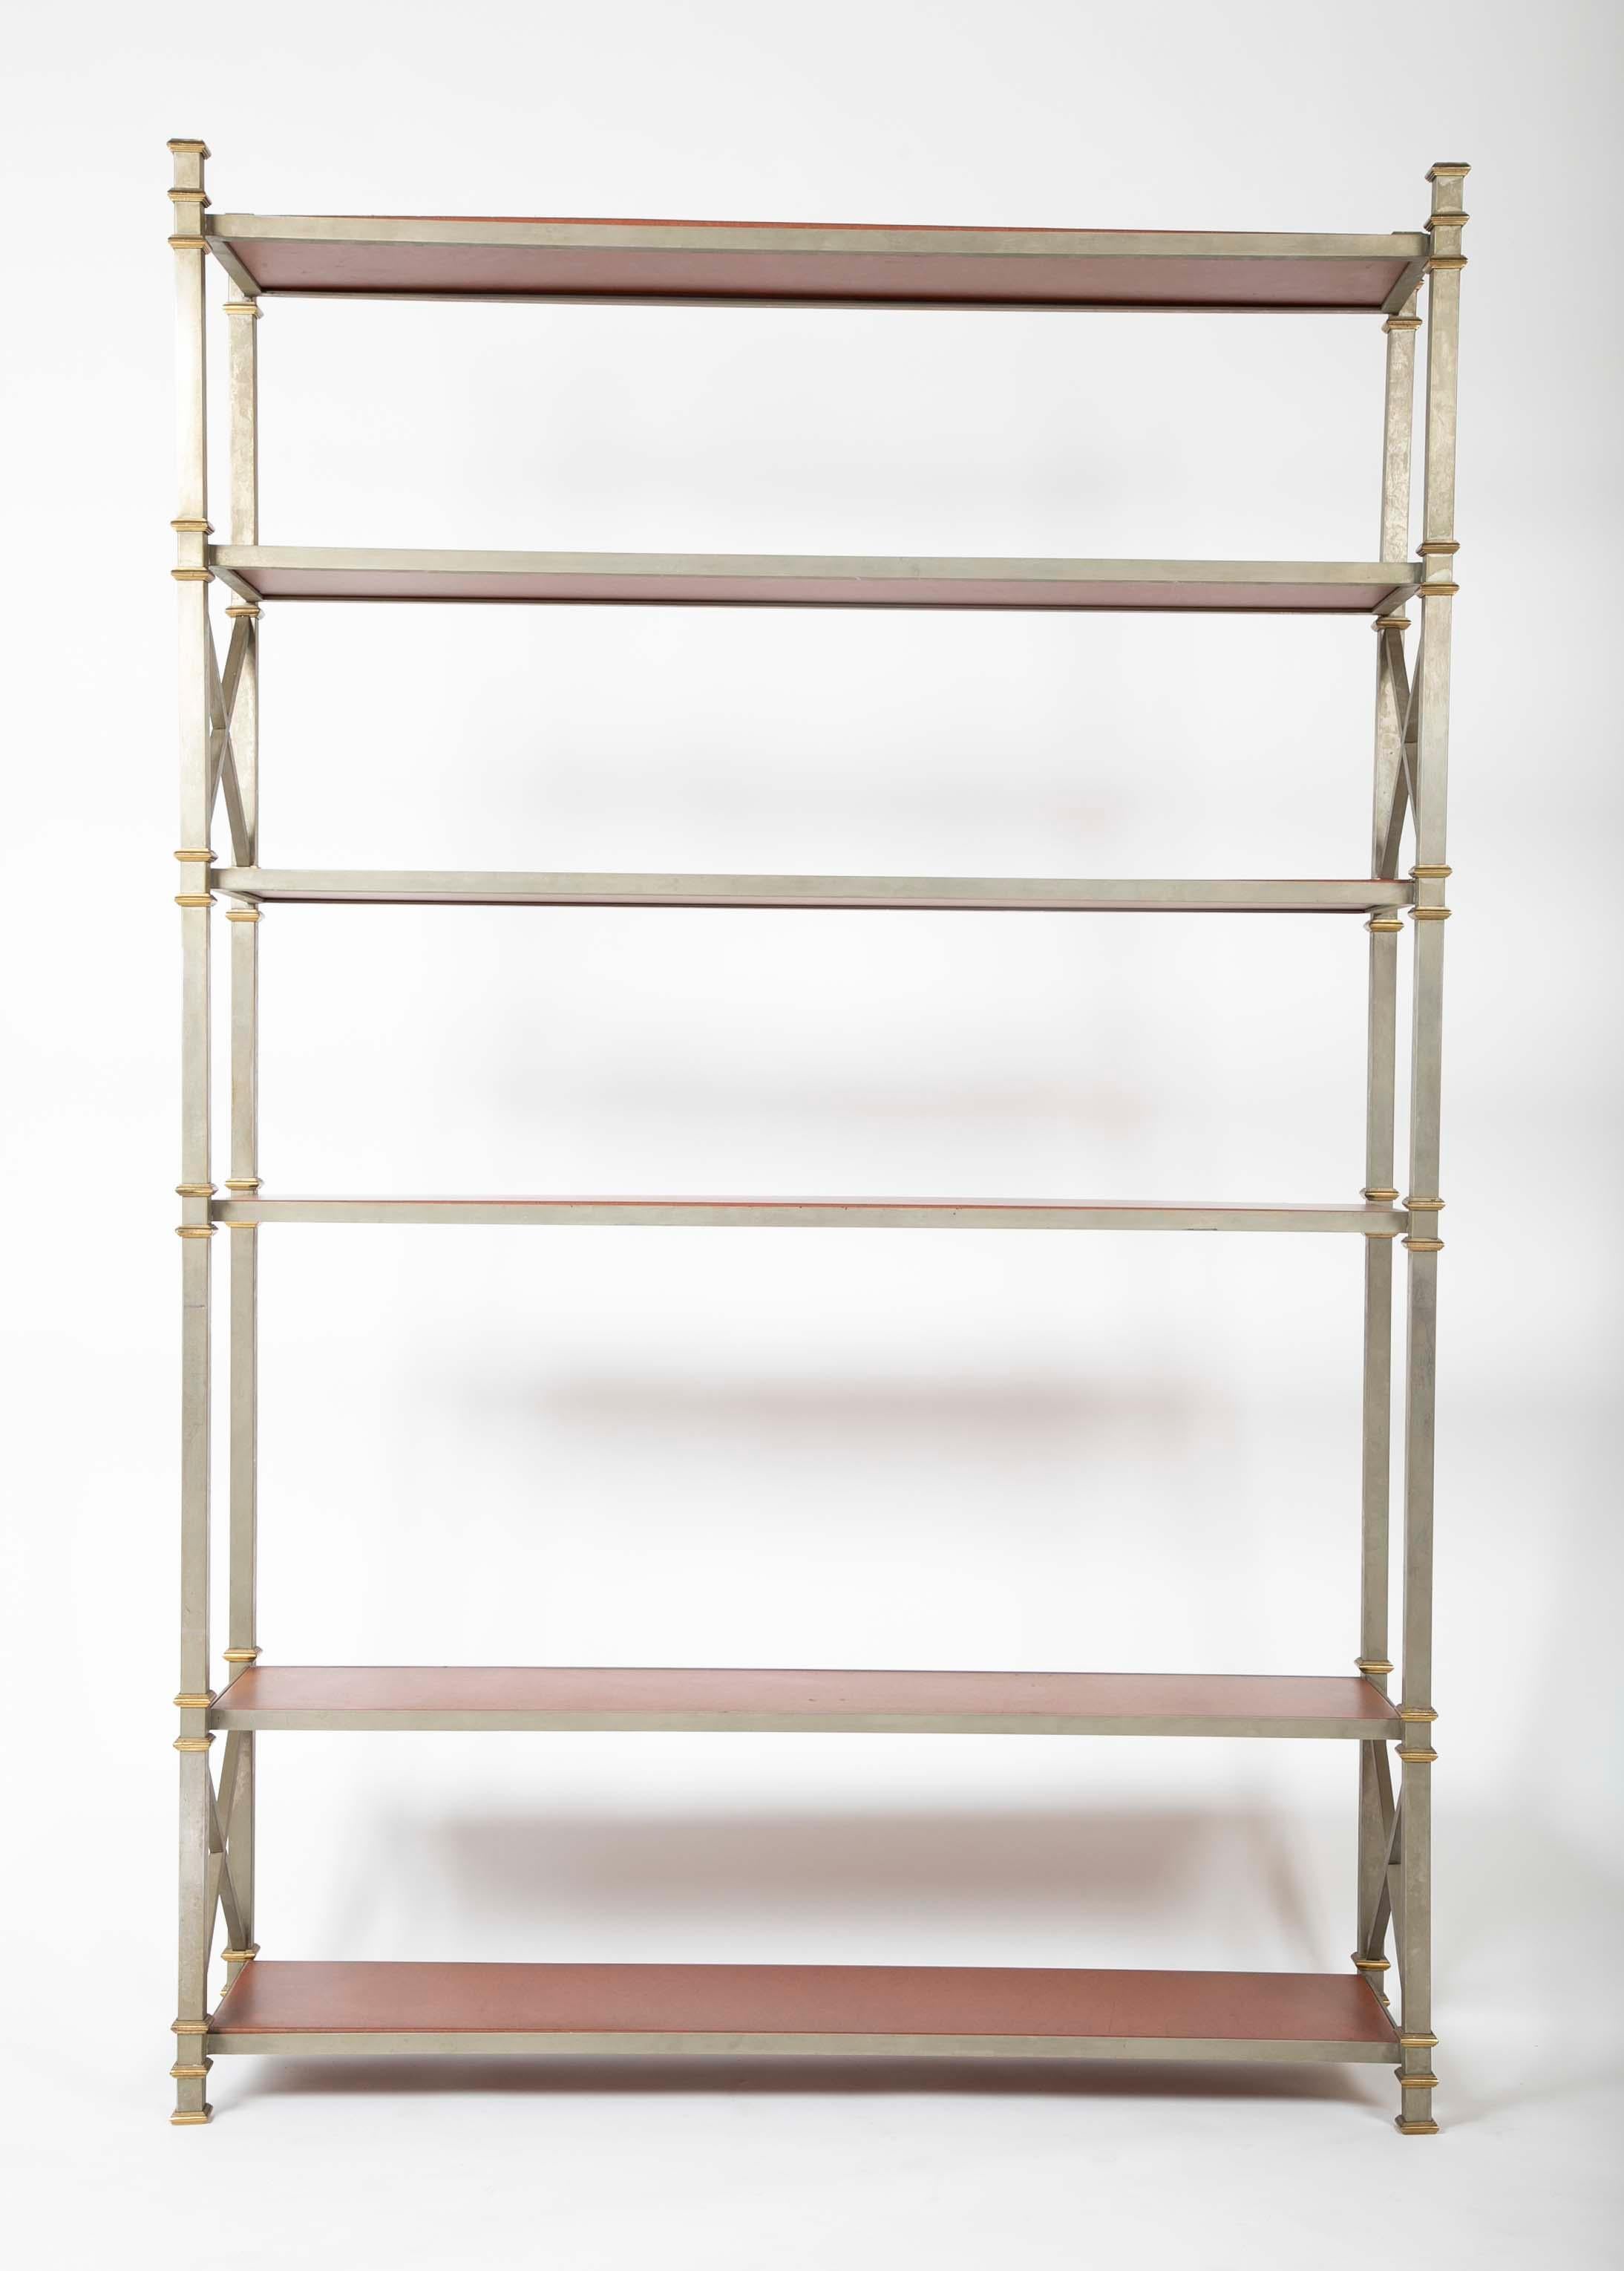 A Jansen style brass and steel etagere having handsome leatherette shelves. Designed by Barbara Darcy.